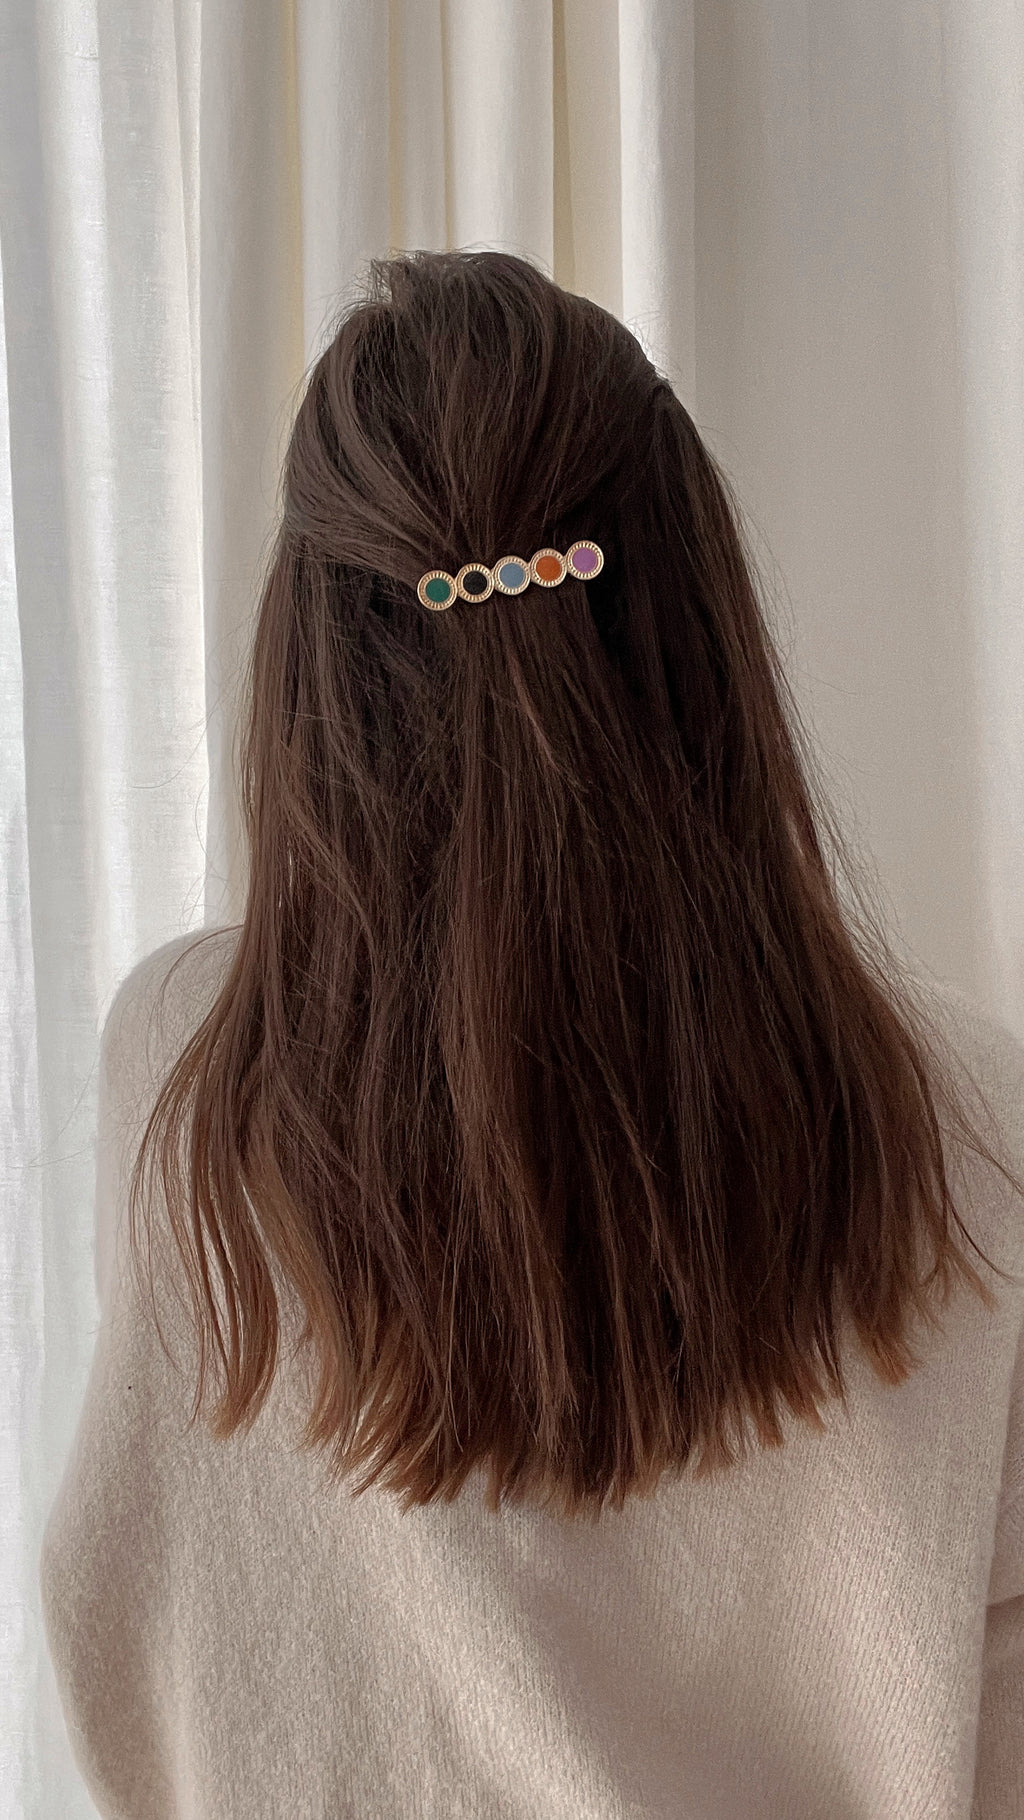 Styla hairclip - Golden and multicolored